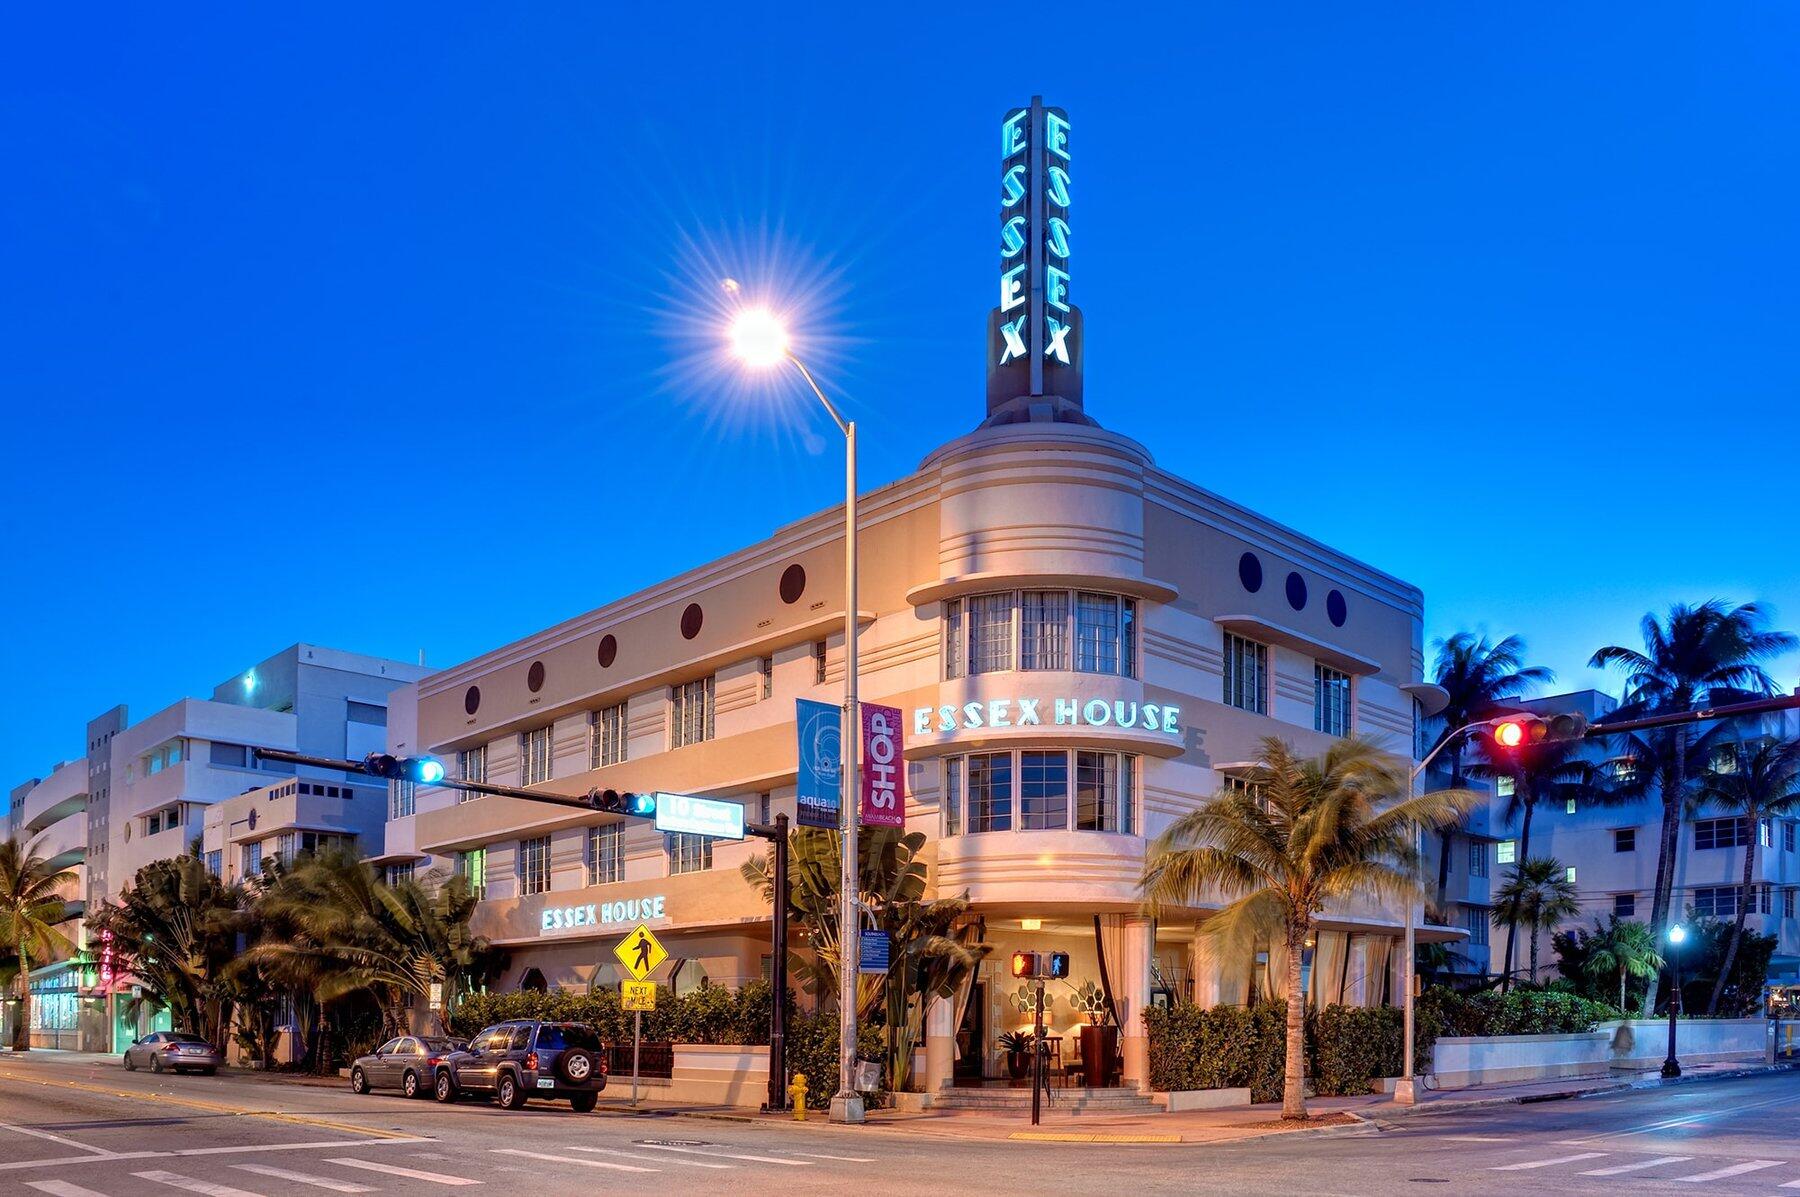 The Essex House is a charming Art Deco building on Collins Avenue, known for its elegant curves, pastel colors, and decorative motifs. Built in 1938, it has been beautifully restored and is now a boutique hotel that offers a peaceful retreat in the heart of South Beach.]]>